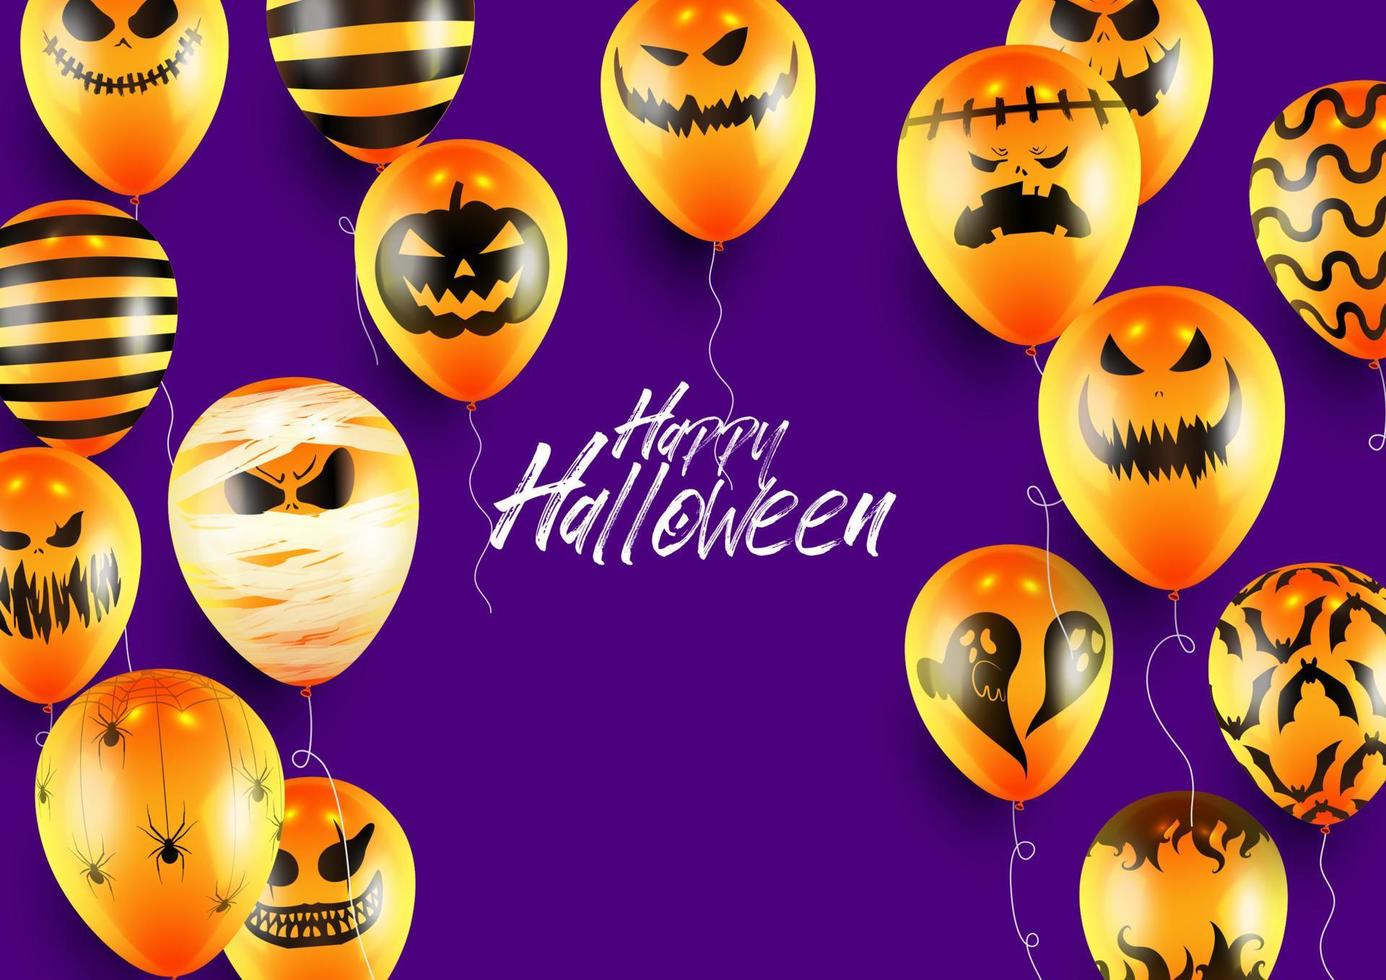 Halloween Poster and Banner Template with Orange Balloons on Purple background vector